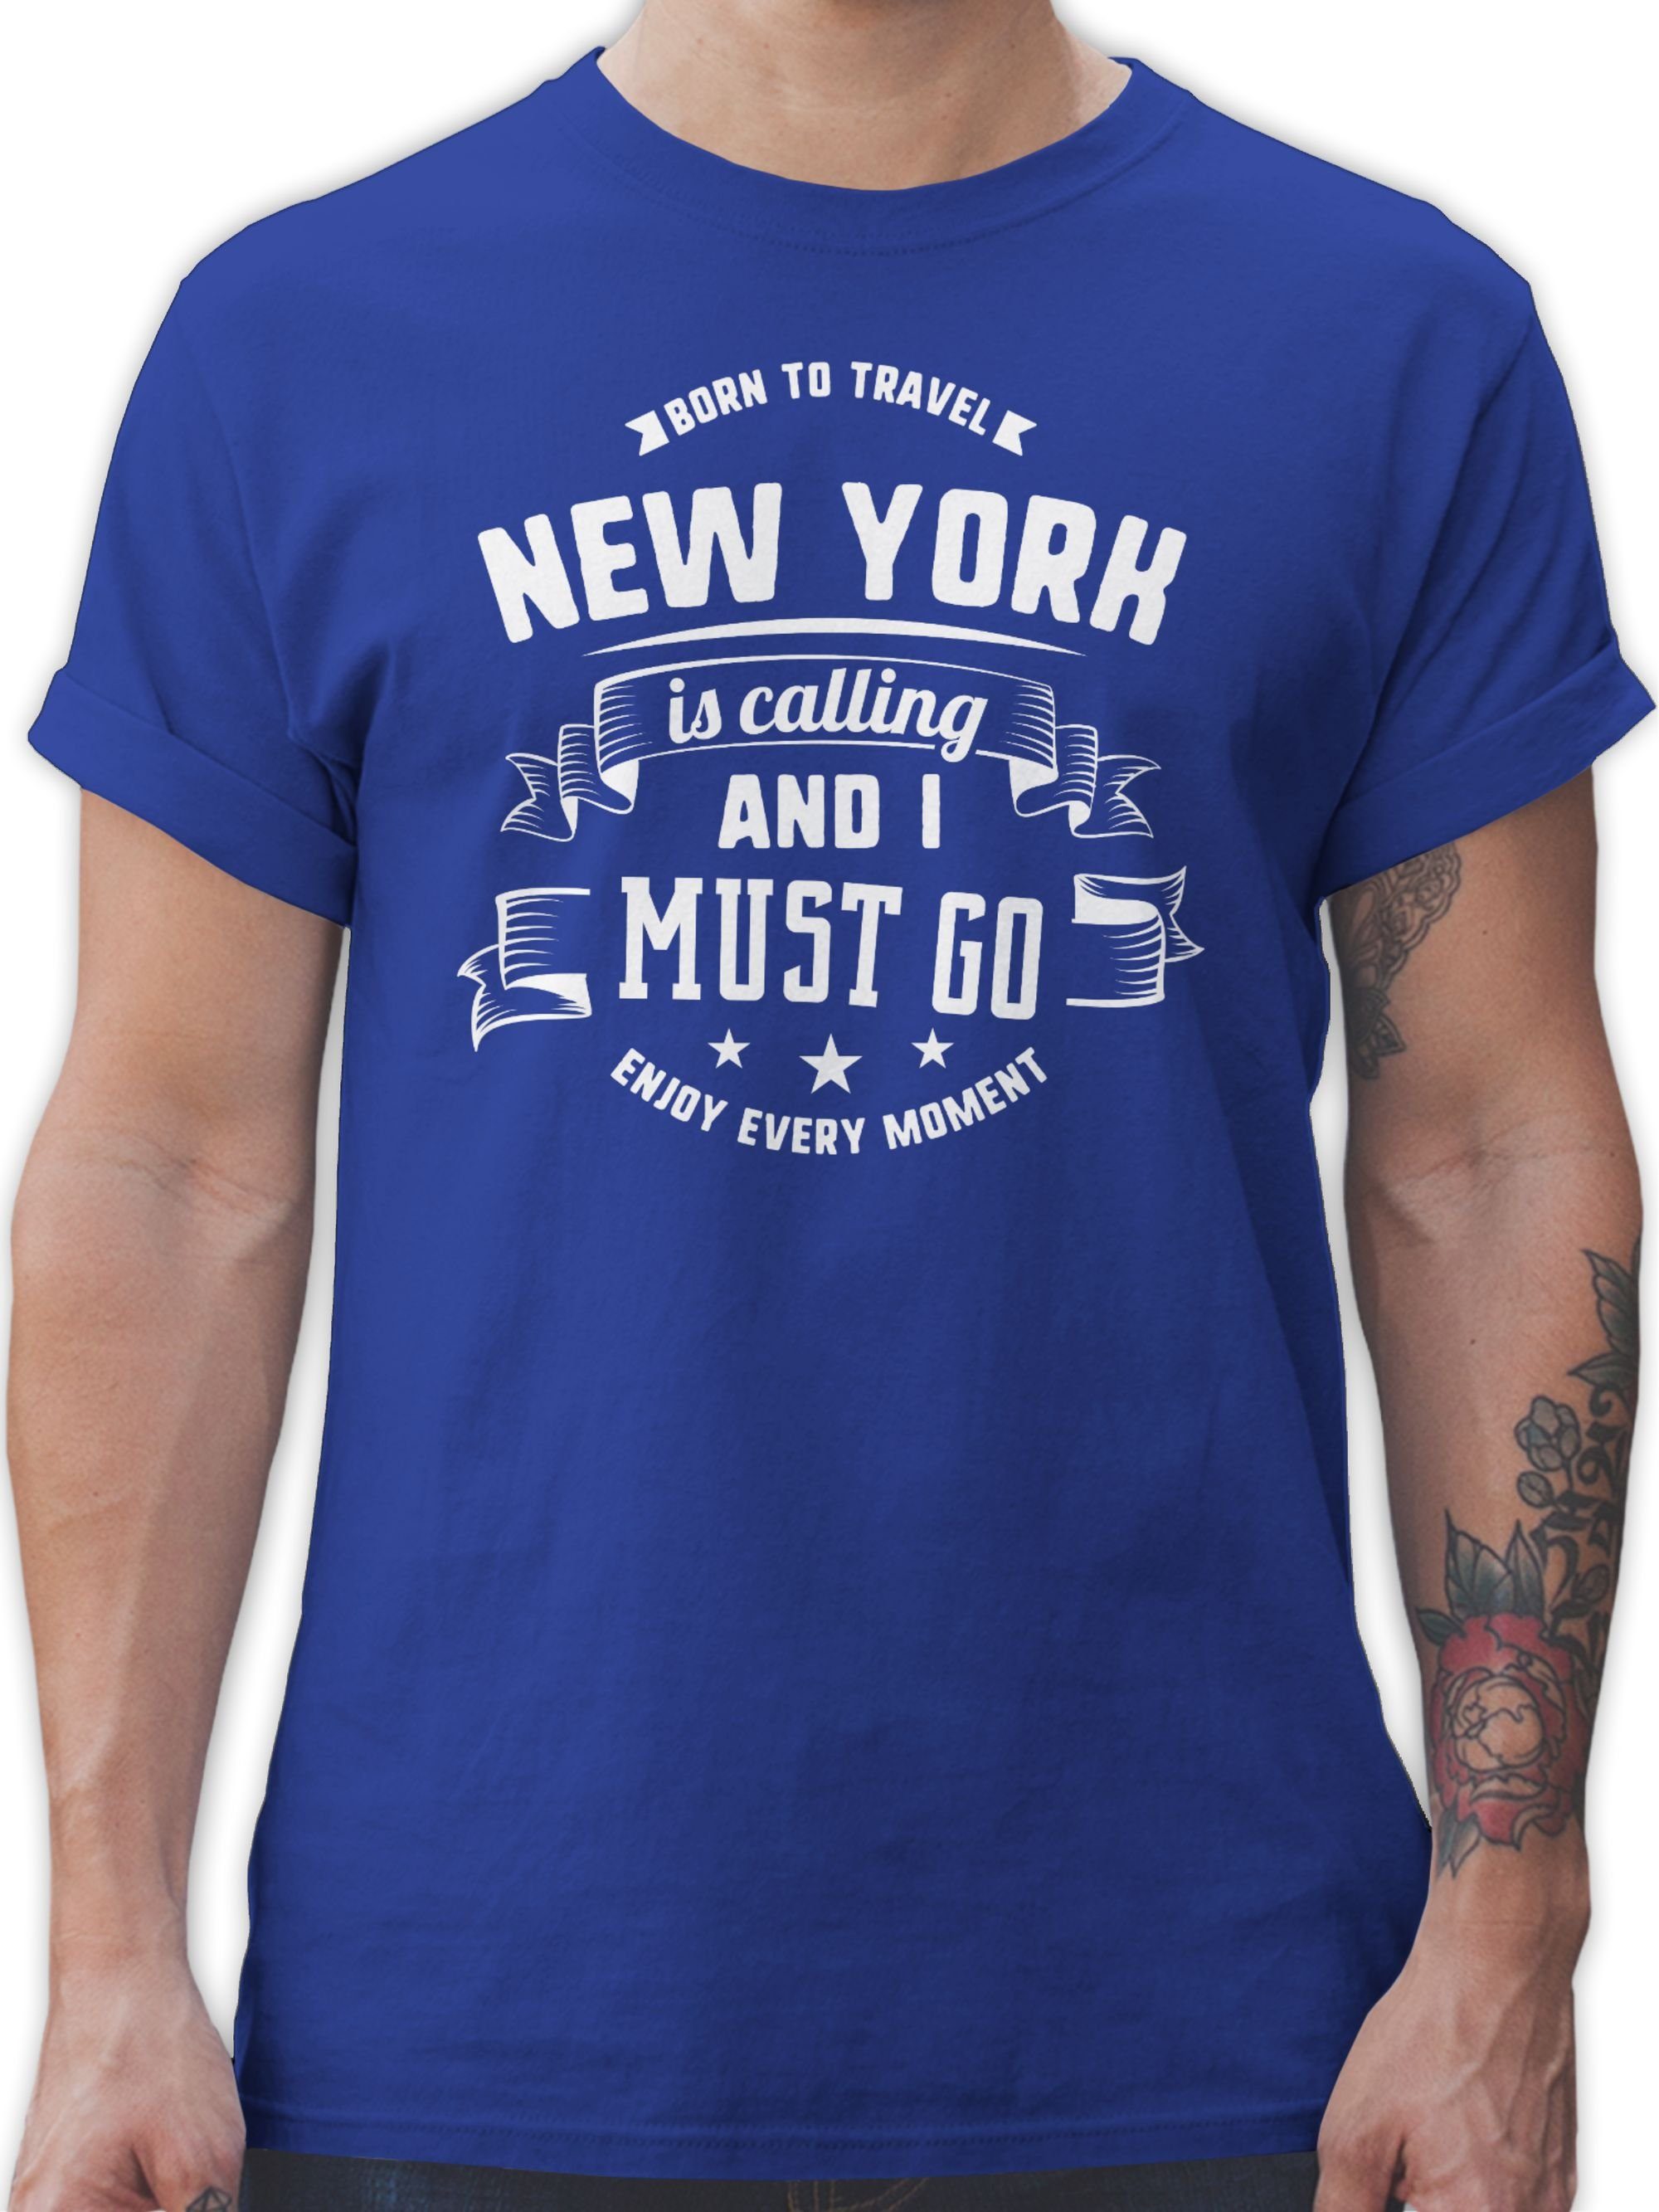 Weiß Outfit I Stadt Shirtracer go is and 03 und must calling City New T-Shirt Royalblau York